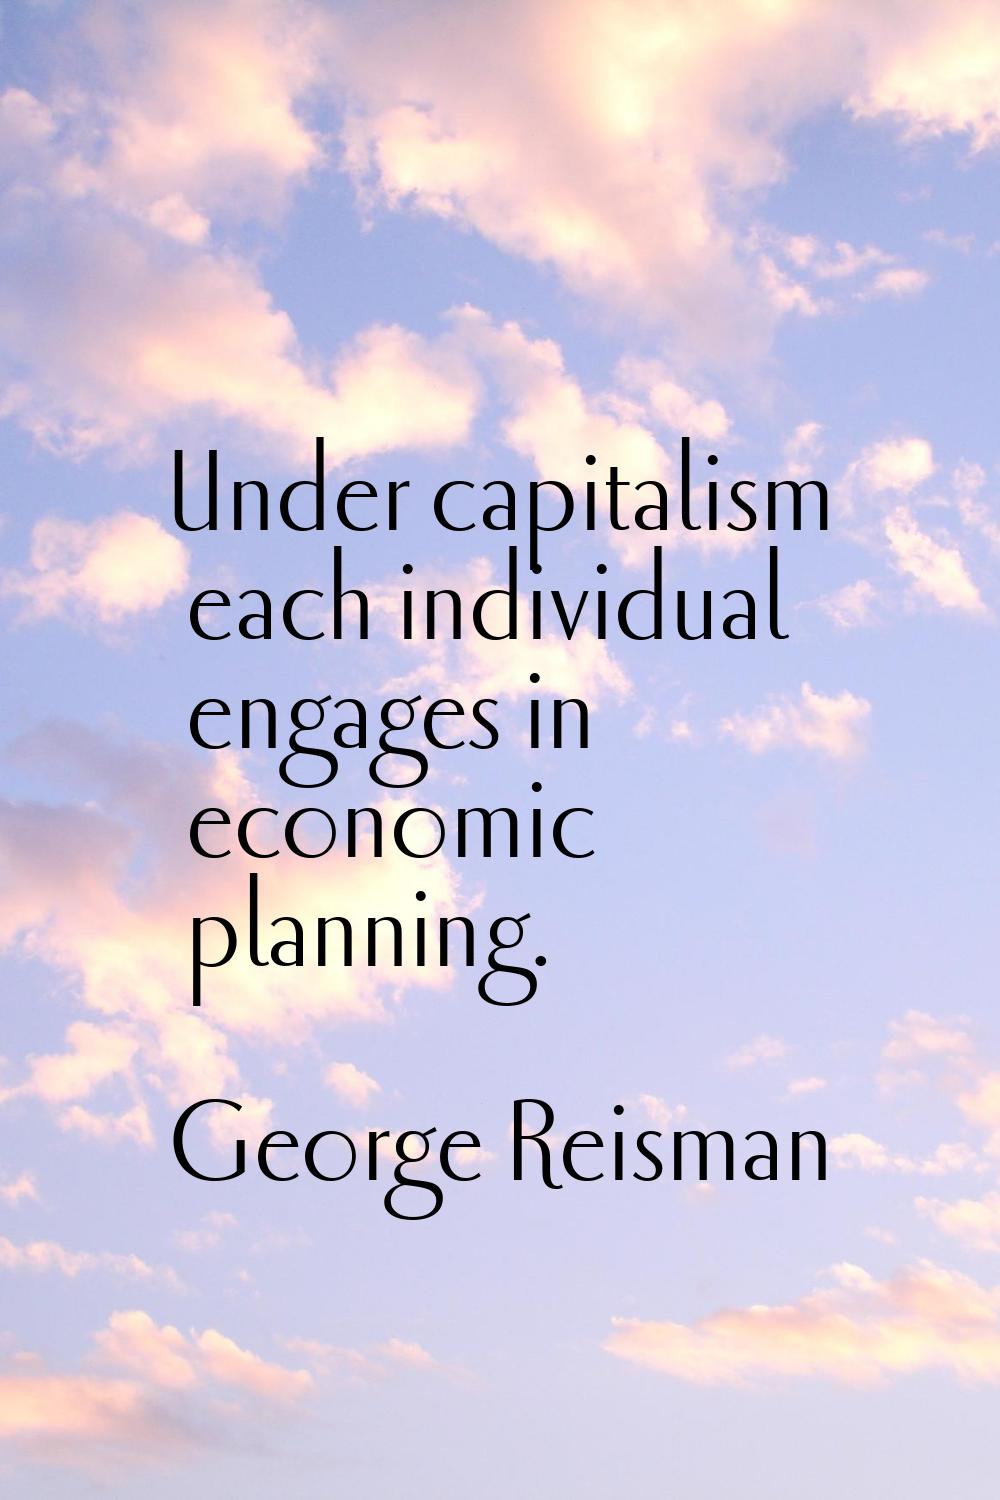 Under capitalism each individual engages in economic planning.